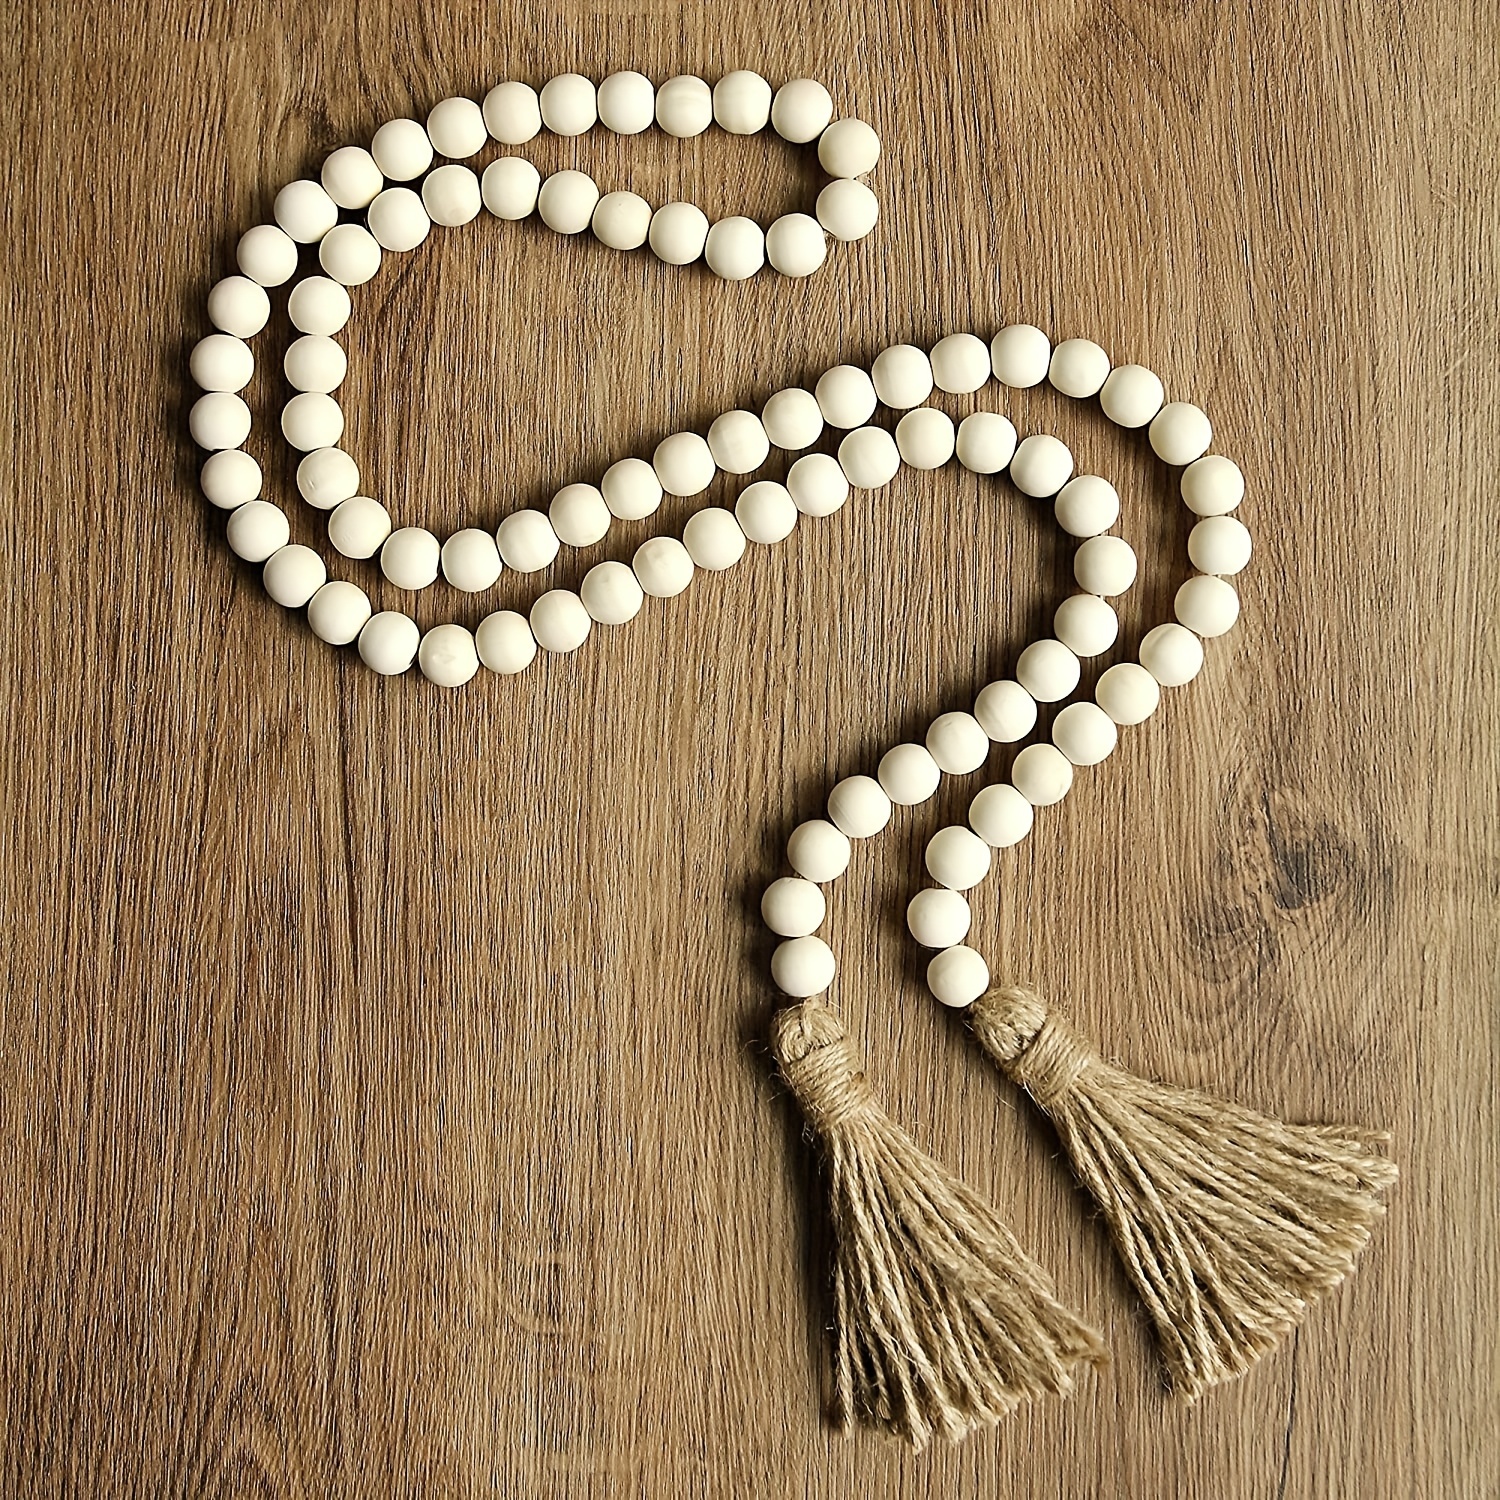 Ornativity Farmhouse Beads Wooden Garland- Wood Prayer Bead Garland with  Tassels Boho Rustic Accented Home décor Country style hanging beads 60  inches